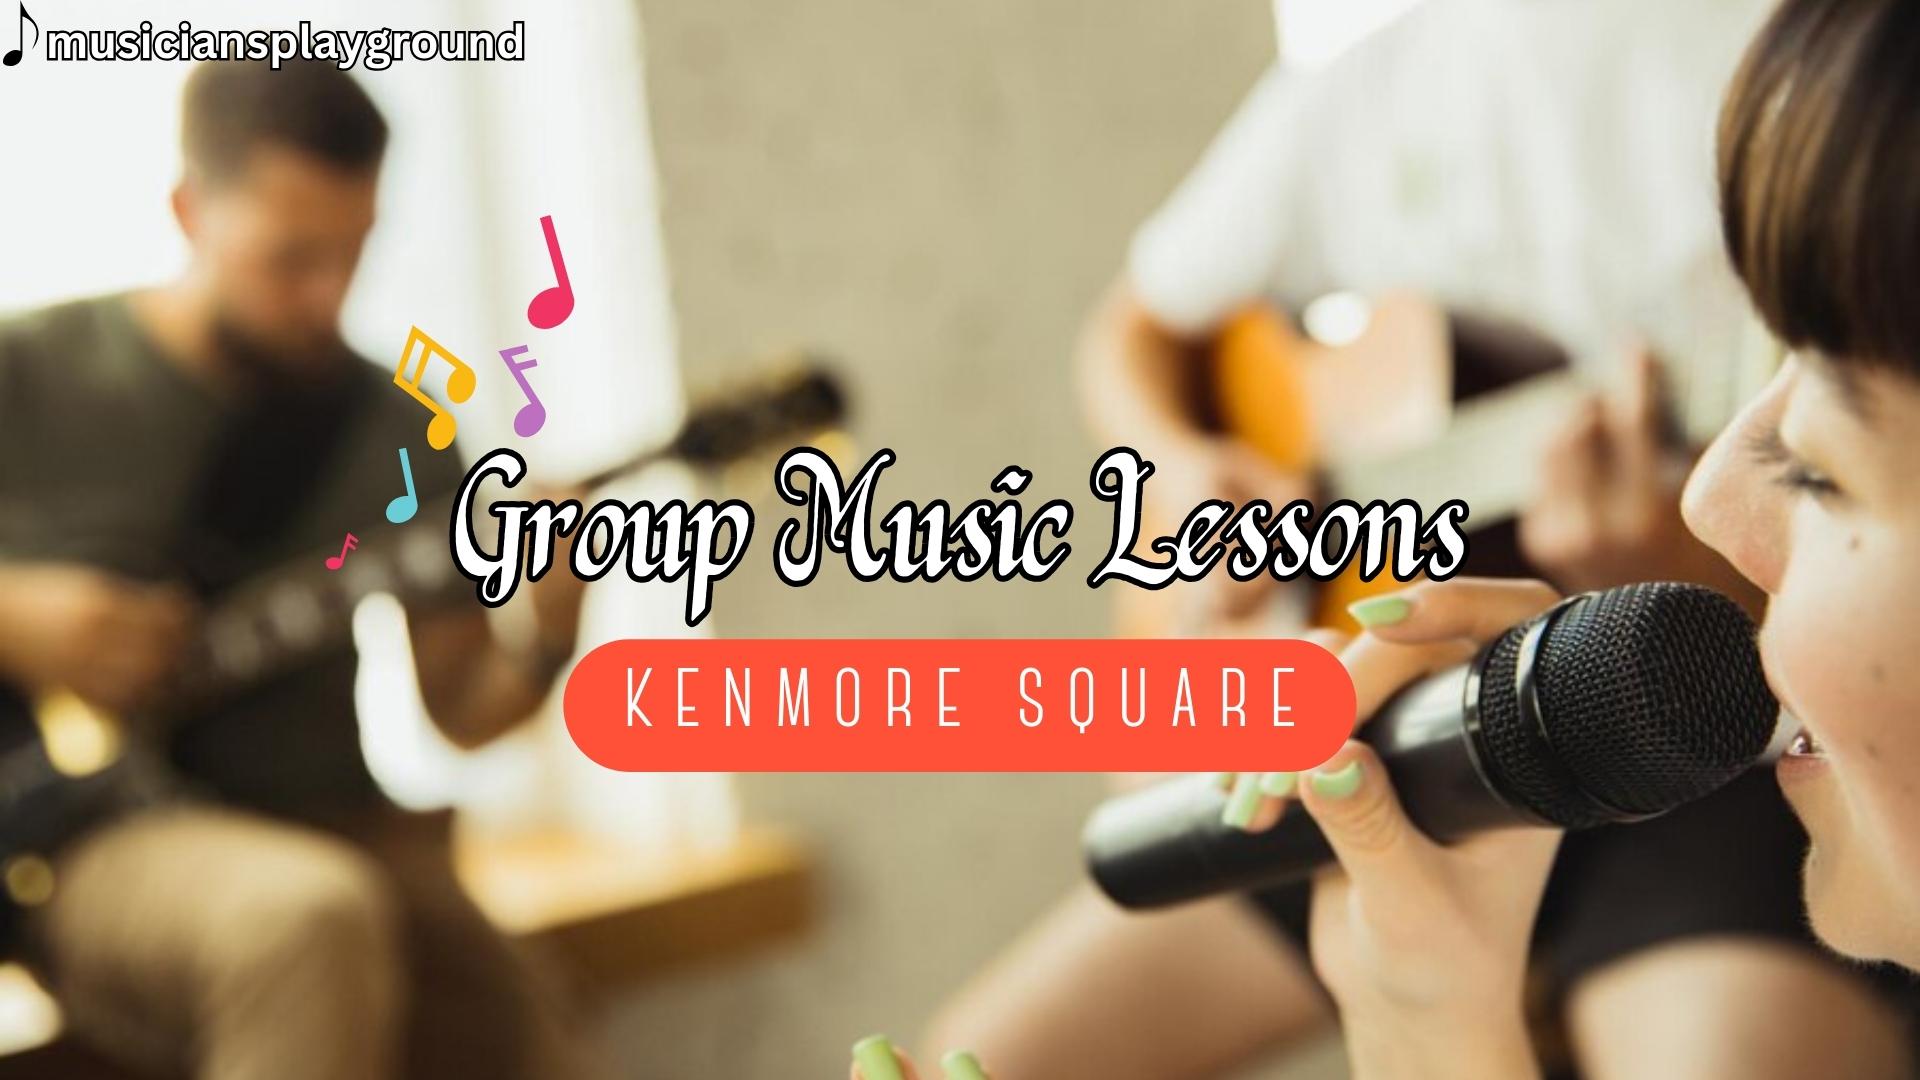 Group Music Lessons in Kenmore Square, Massachusetts: Collaborative Music Learning at Musicians Playground